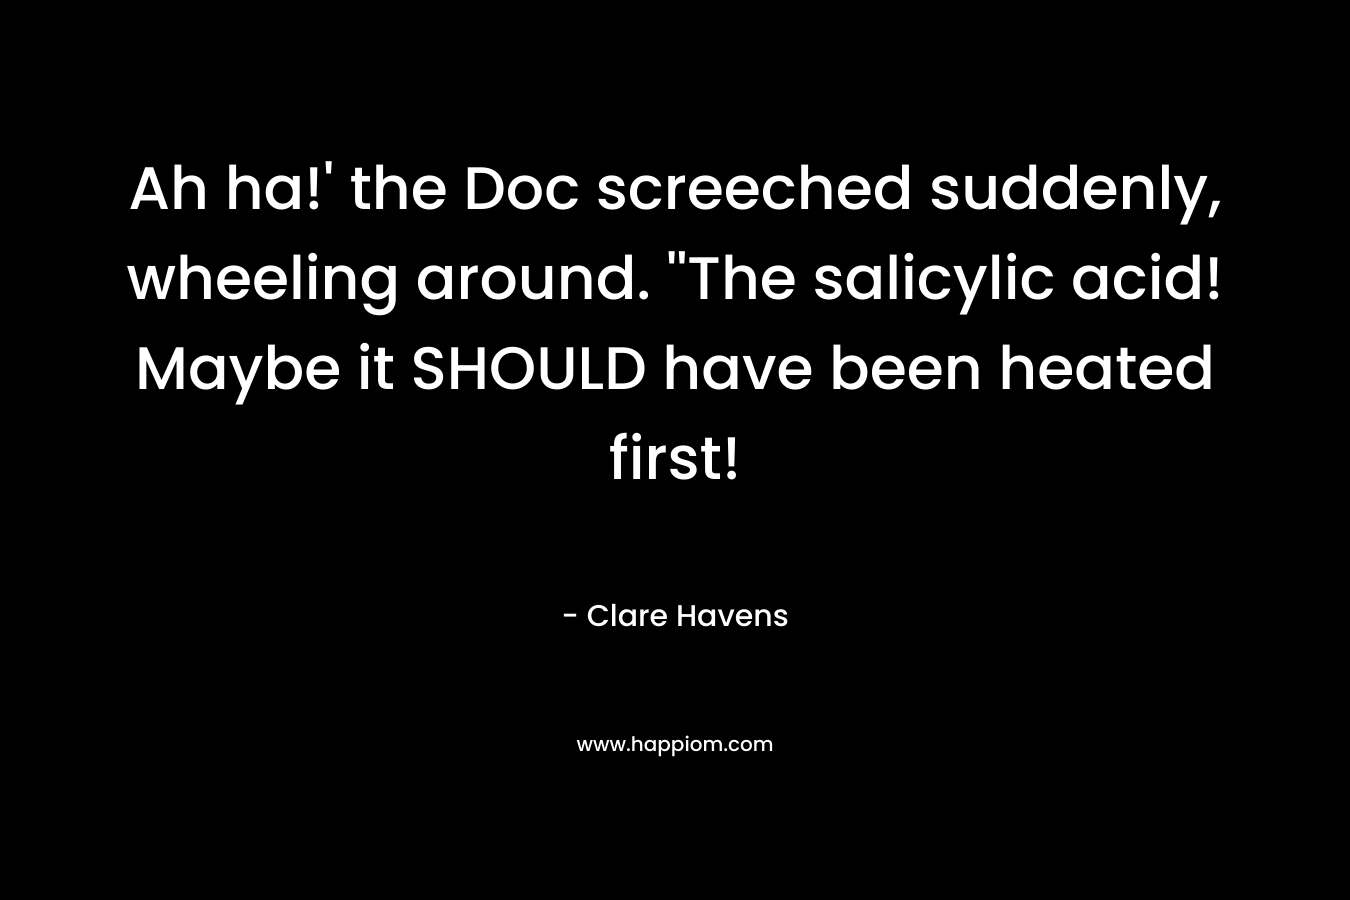 Ah ha!’ the Doc screeched suddenly, wheeling around. ”The salicylic acid! Maybe it SHOULD have been heated first! – Clare Havens